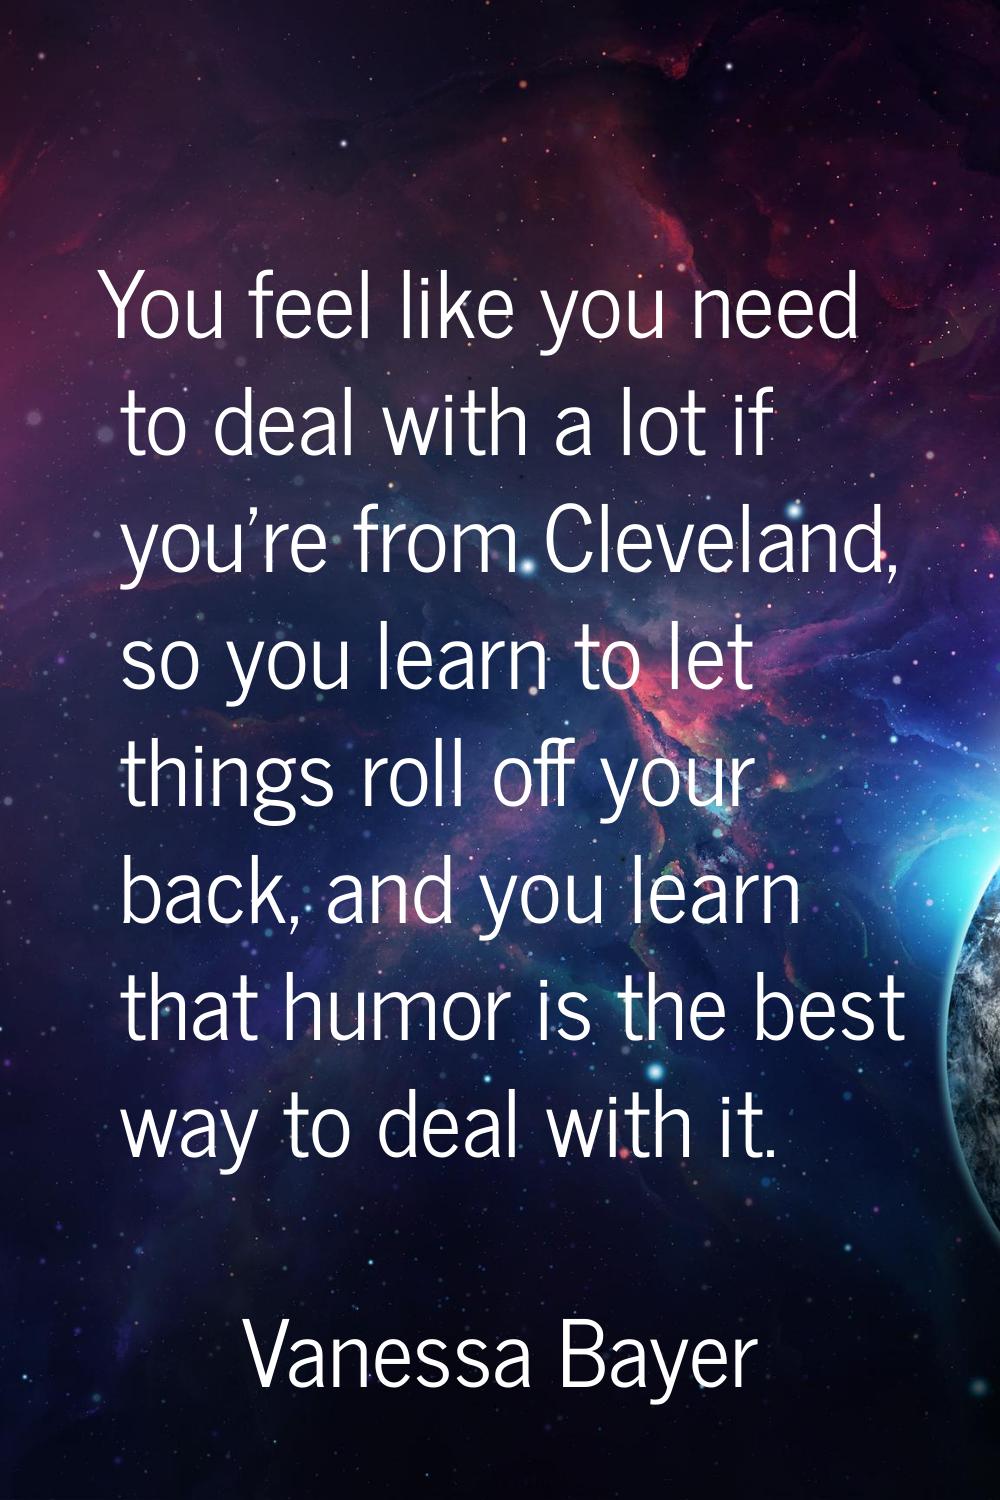 You feel like you need to deal with a lot if you're from Cleveland, so you learn to let things roll